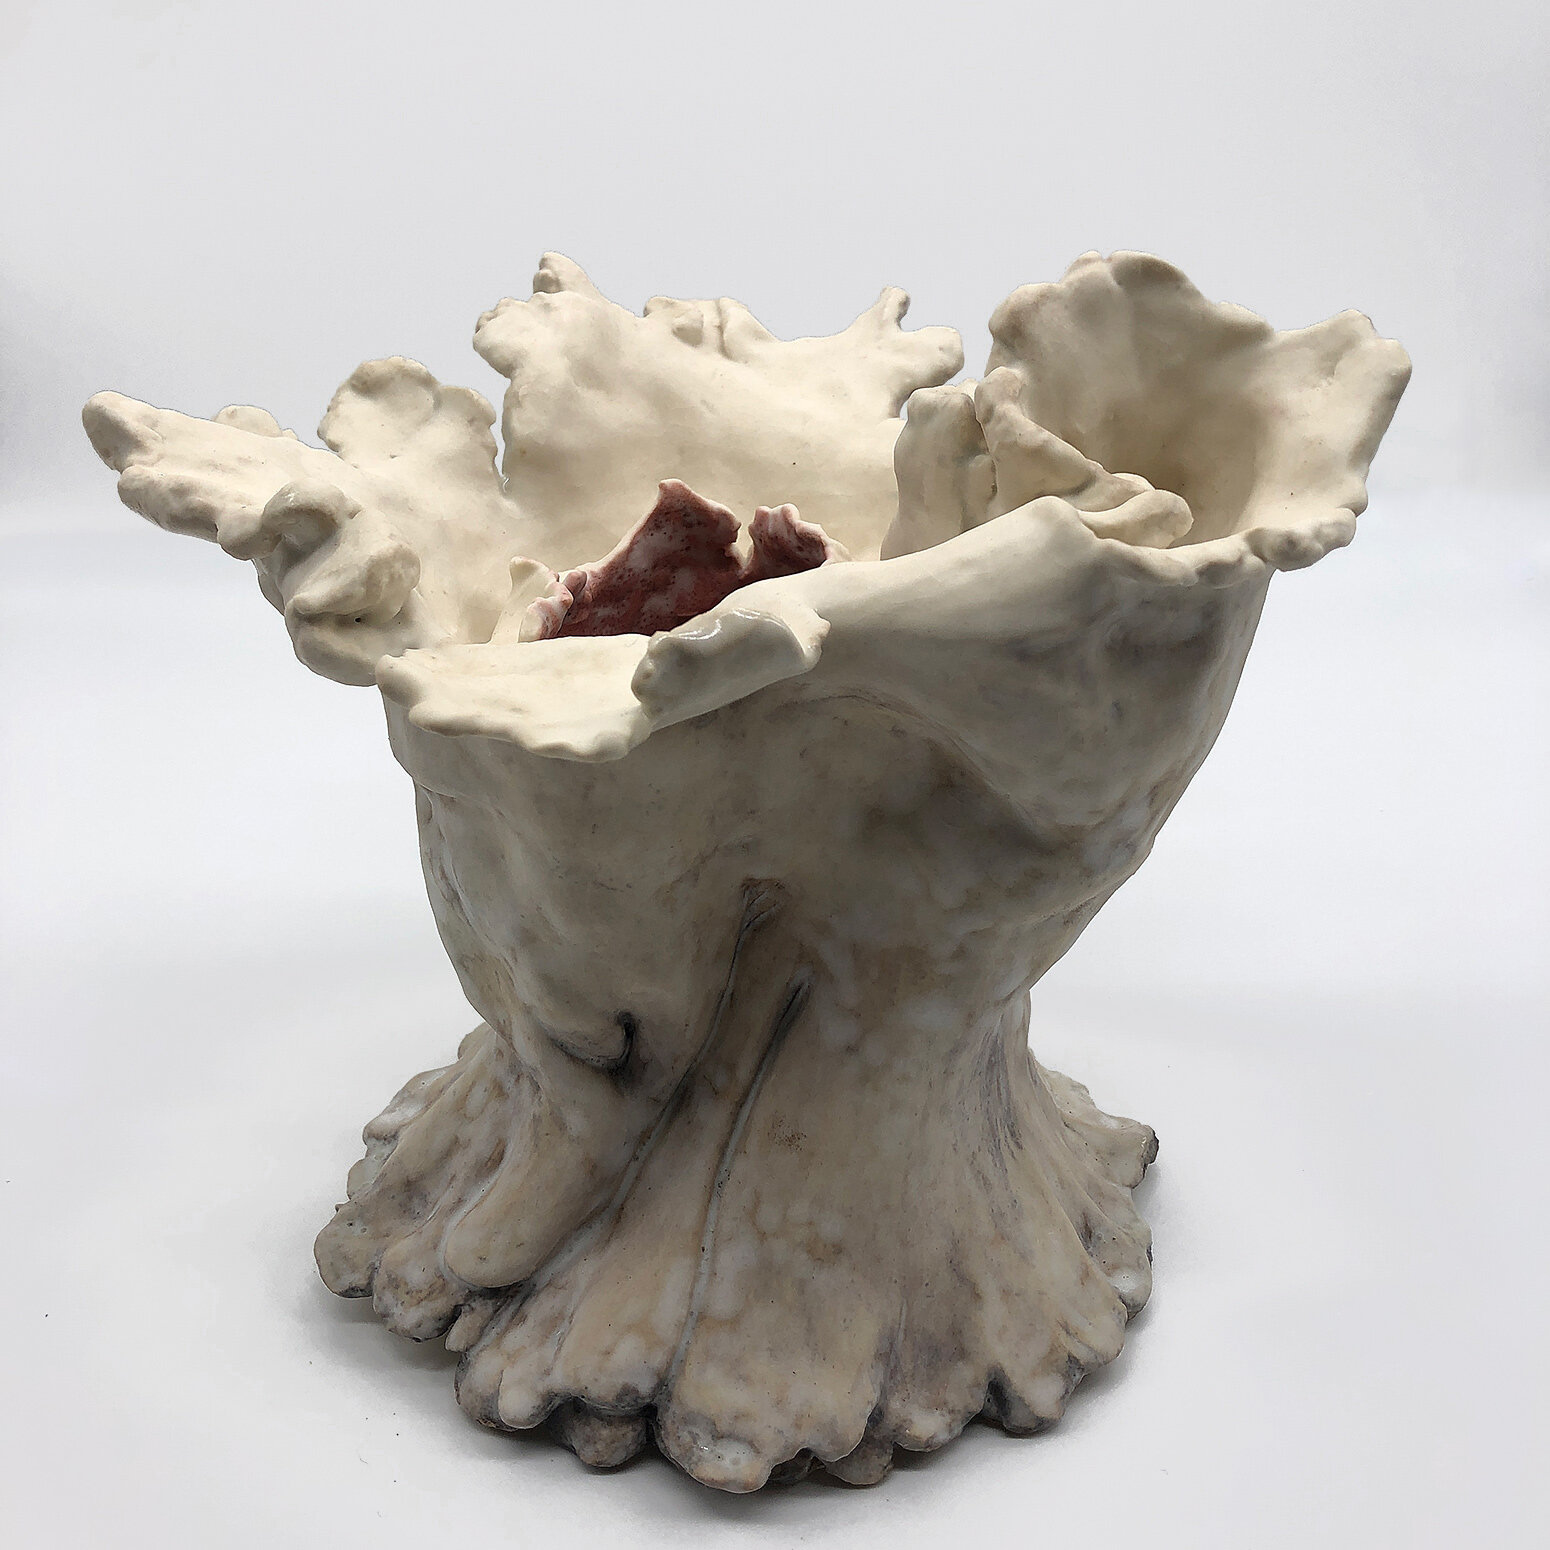   Question Everything   2020 Clay, glaze  8” x 8.5” 